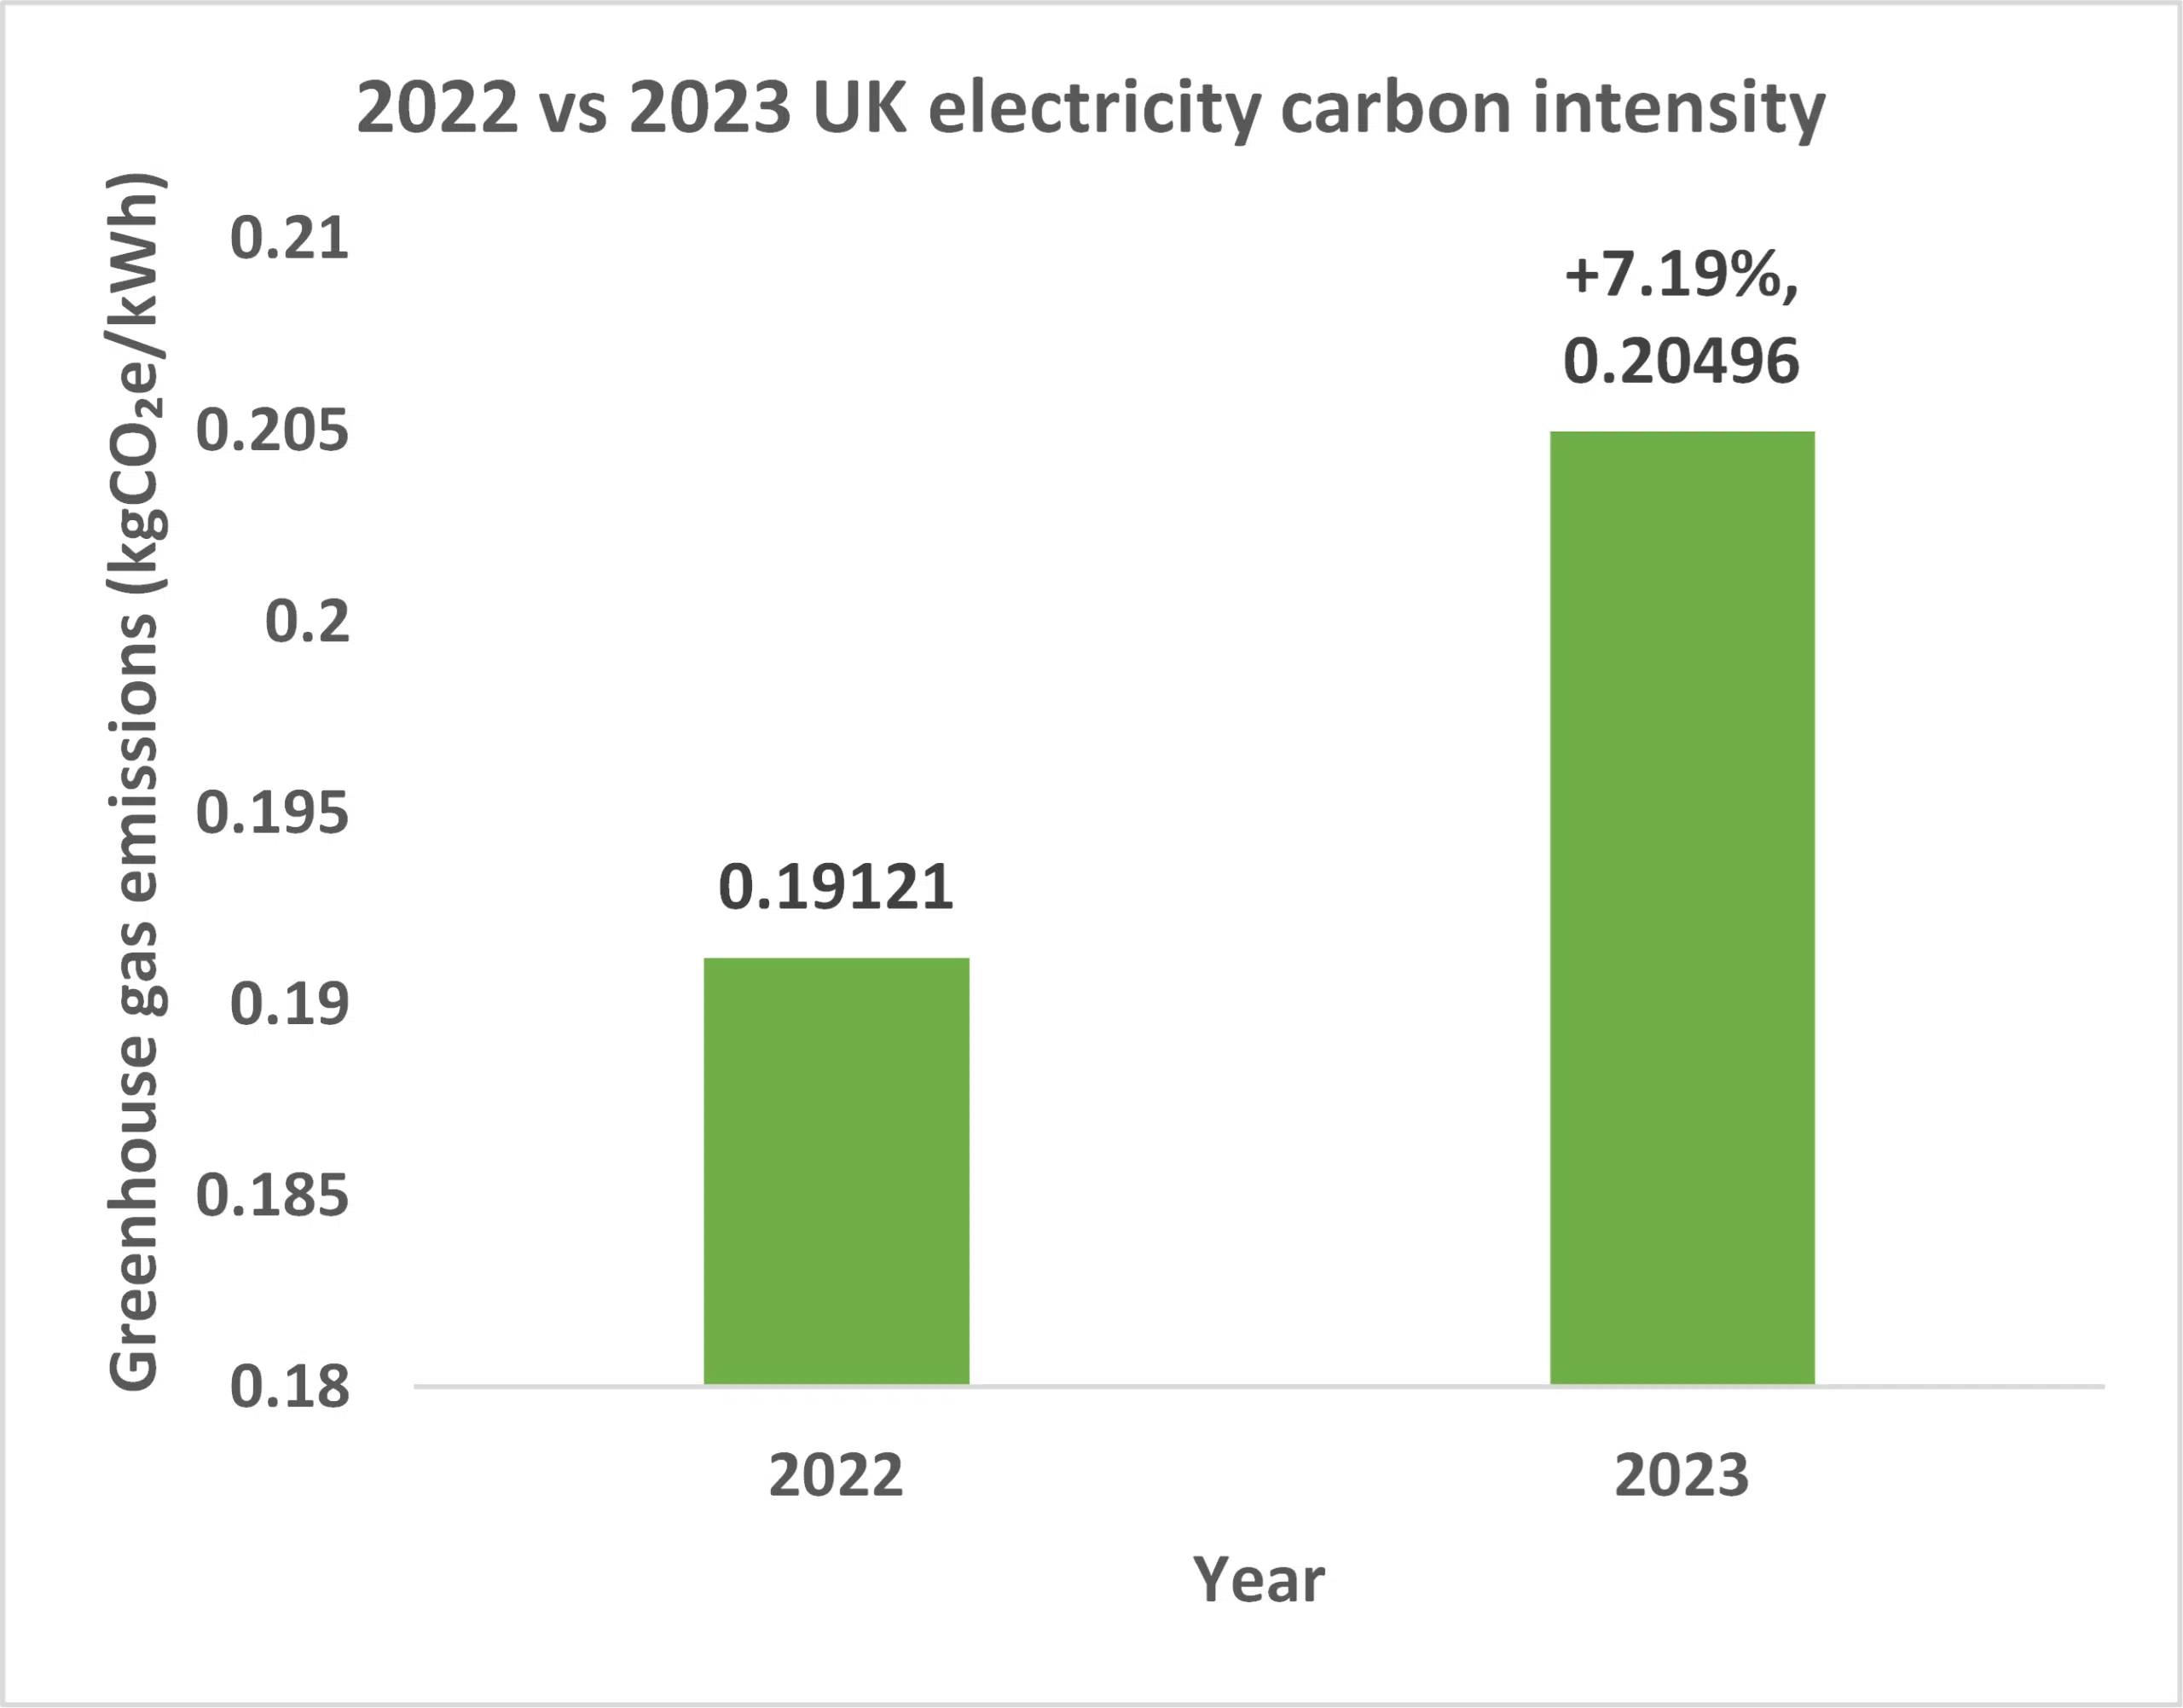 Bar chart showing the carbon intensity of the UK grid in 2022 vs 2023.